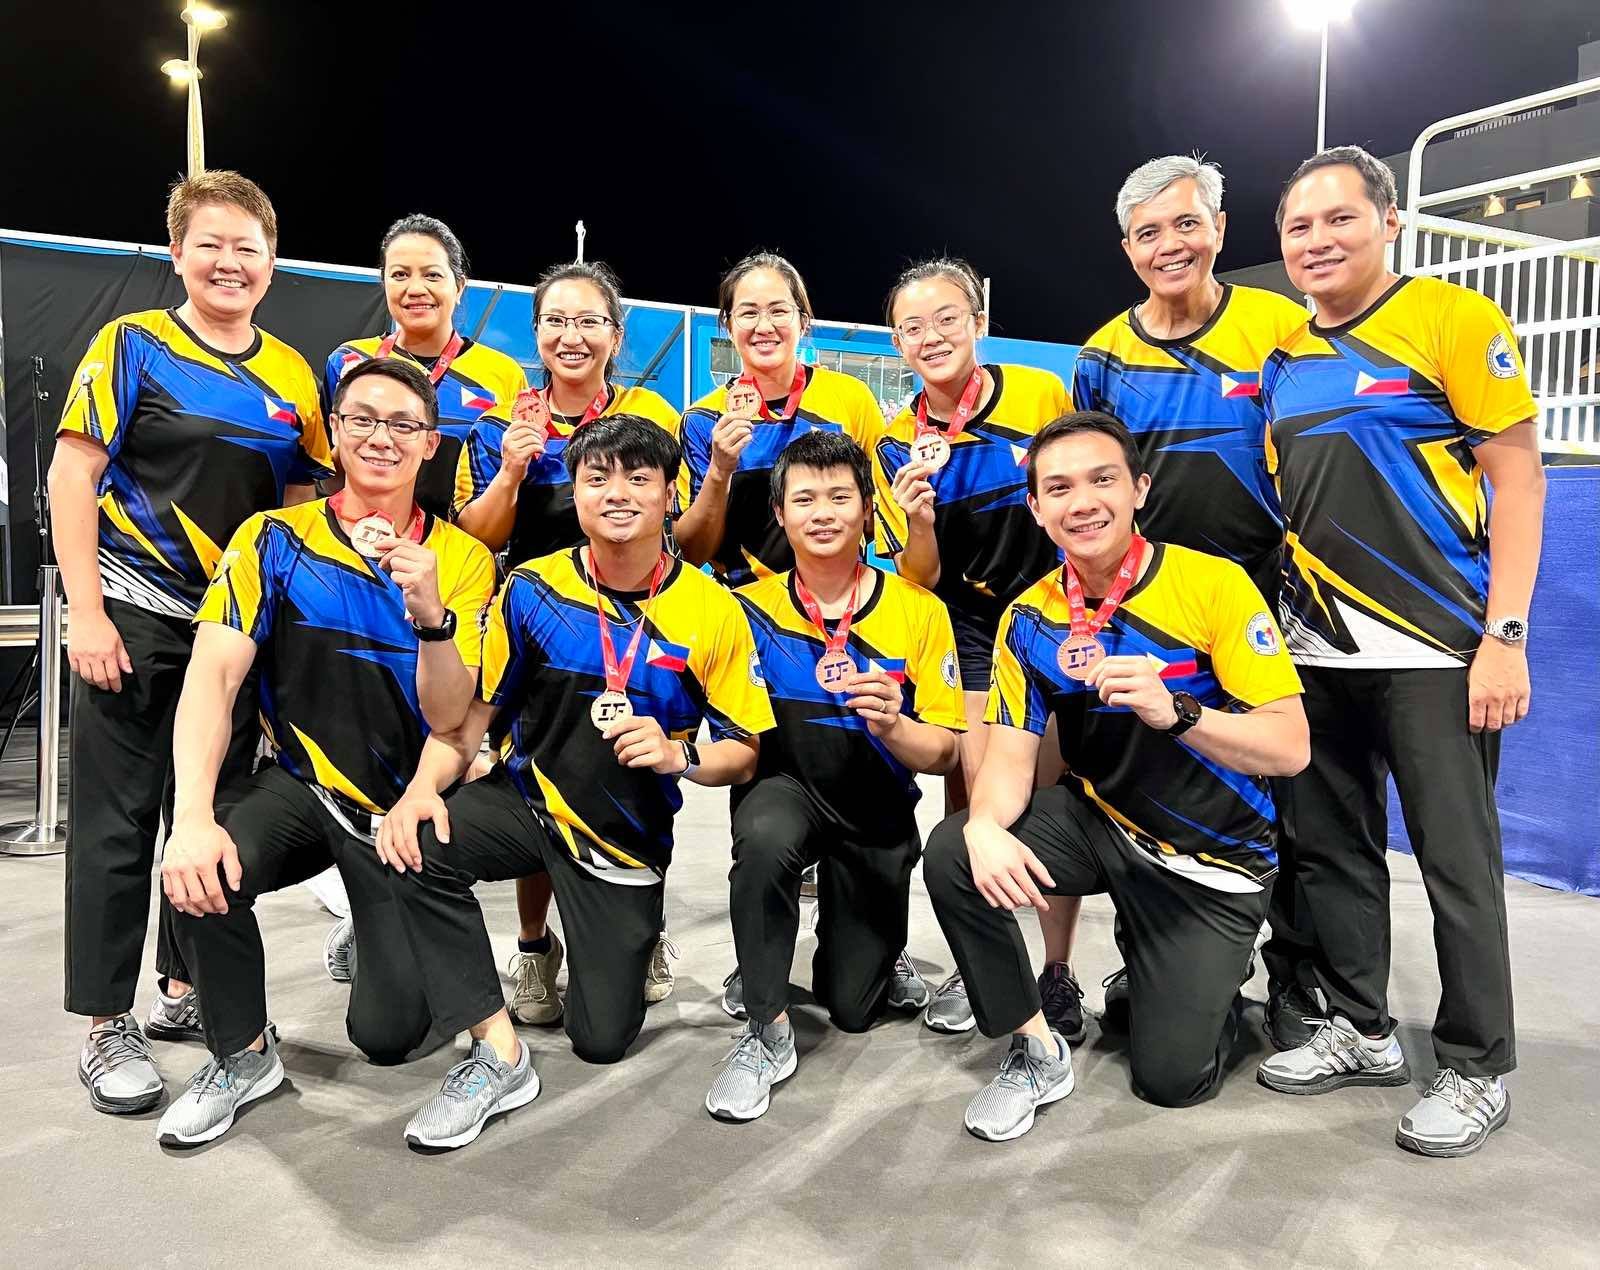 Gold in sight for Philippine bowling team